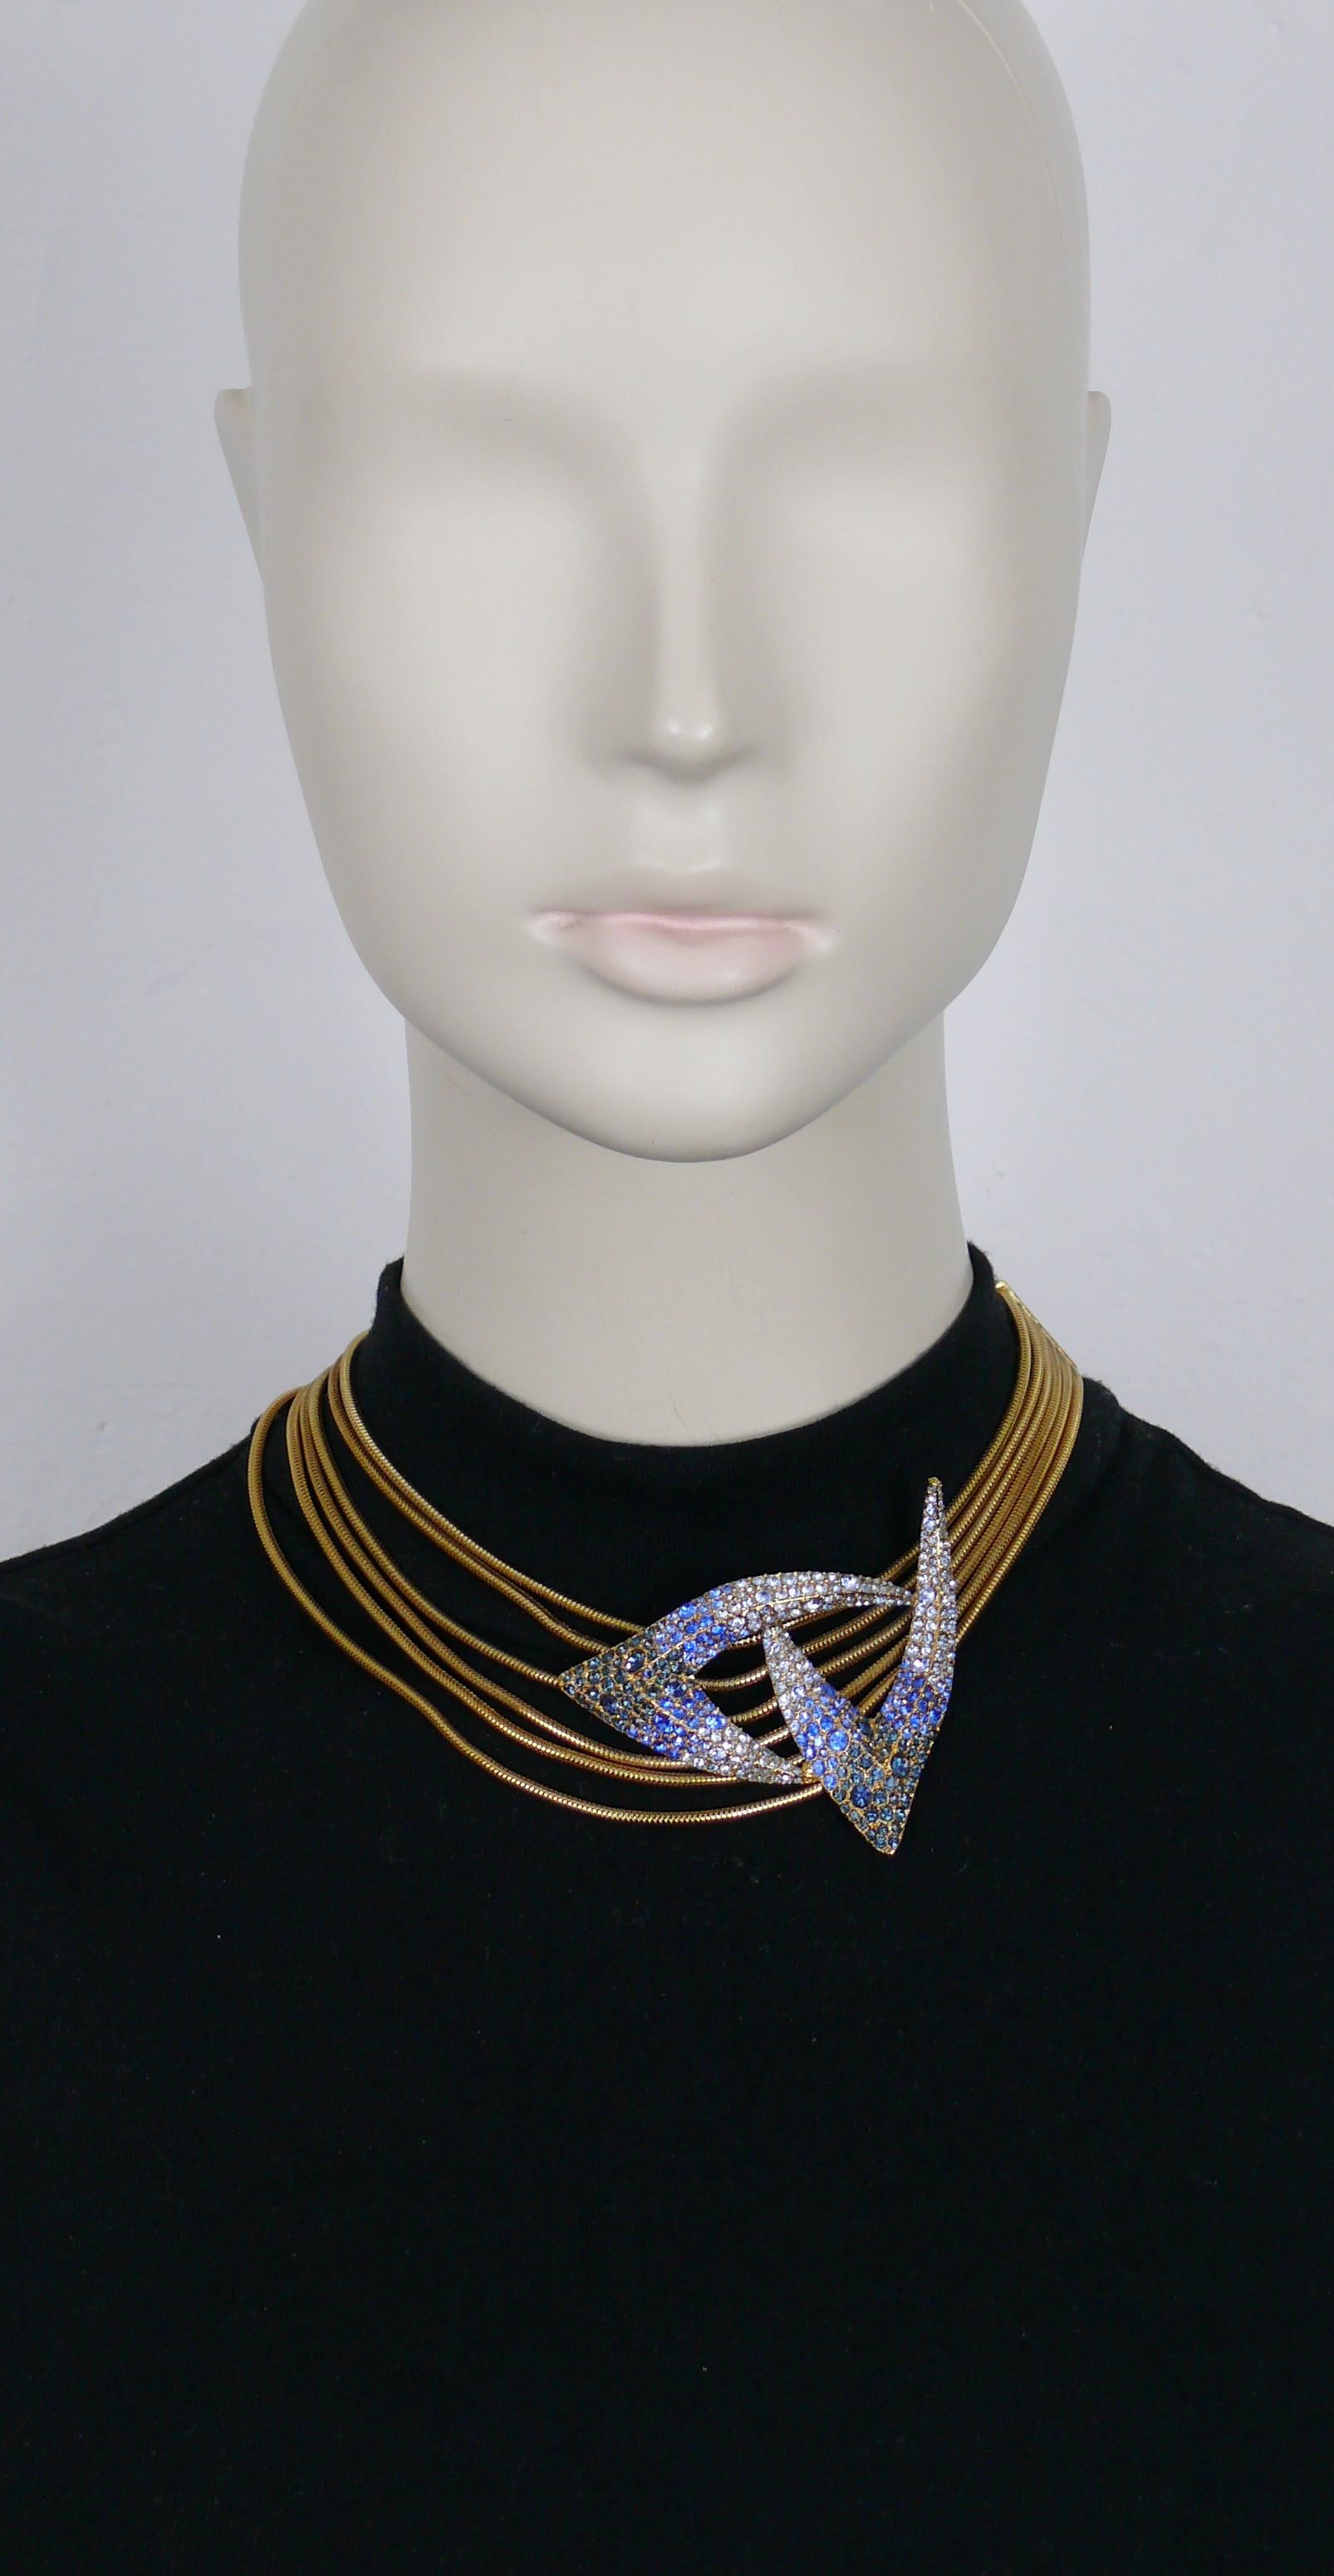 THIERRY MUGLER vintage gold tone snake chains collar necklace featuring a claw design centrepiece embellished with blue shade crystals.

Adjustable hook clasp closure.

Embossed THIERRY MUGLER.

Indicative measurements : length from approx. 35.5 cm